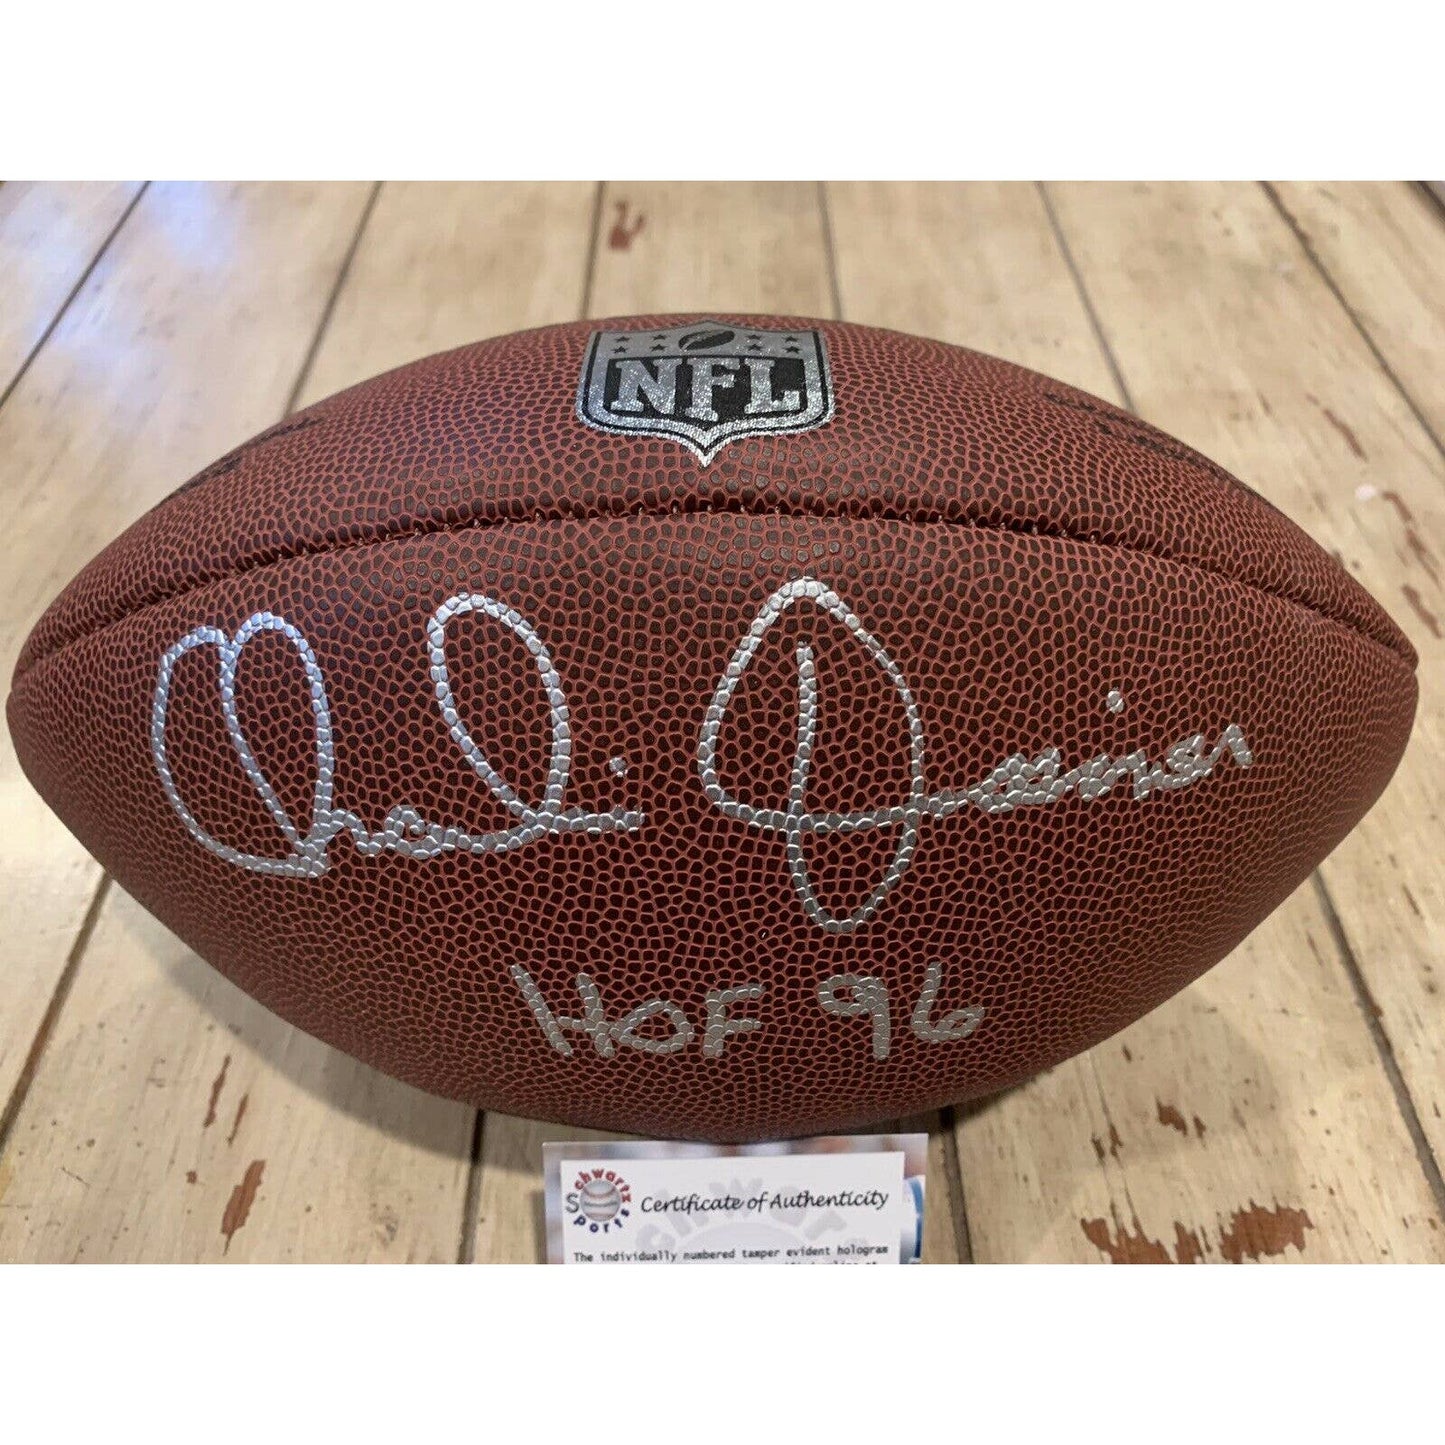 Charlie Joiner Autographed/Signed Football Schwartz COA San Diego Chargers - TreasuresEvolved